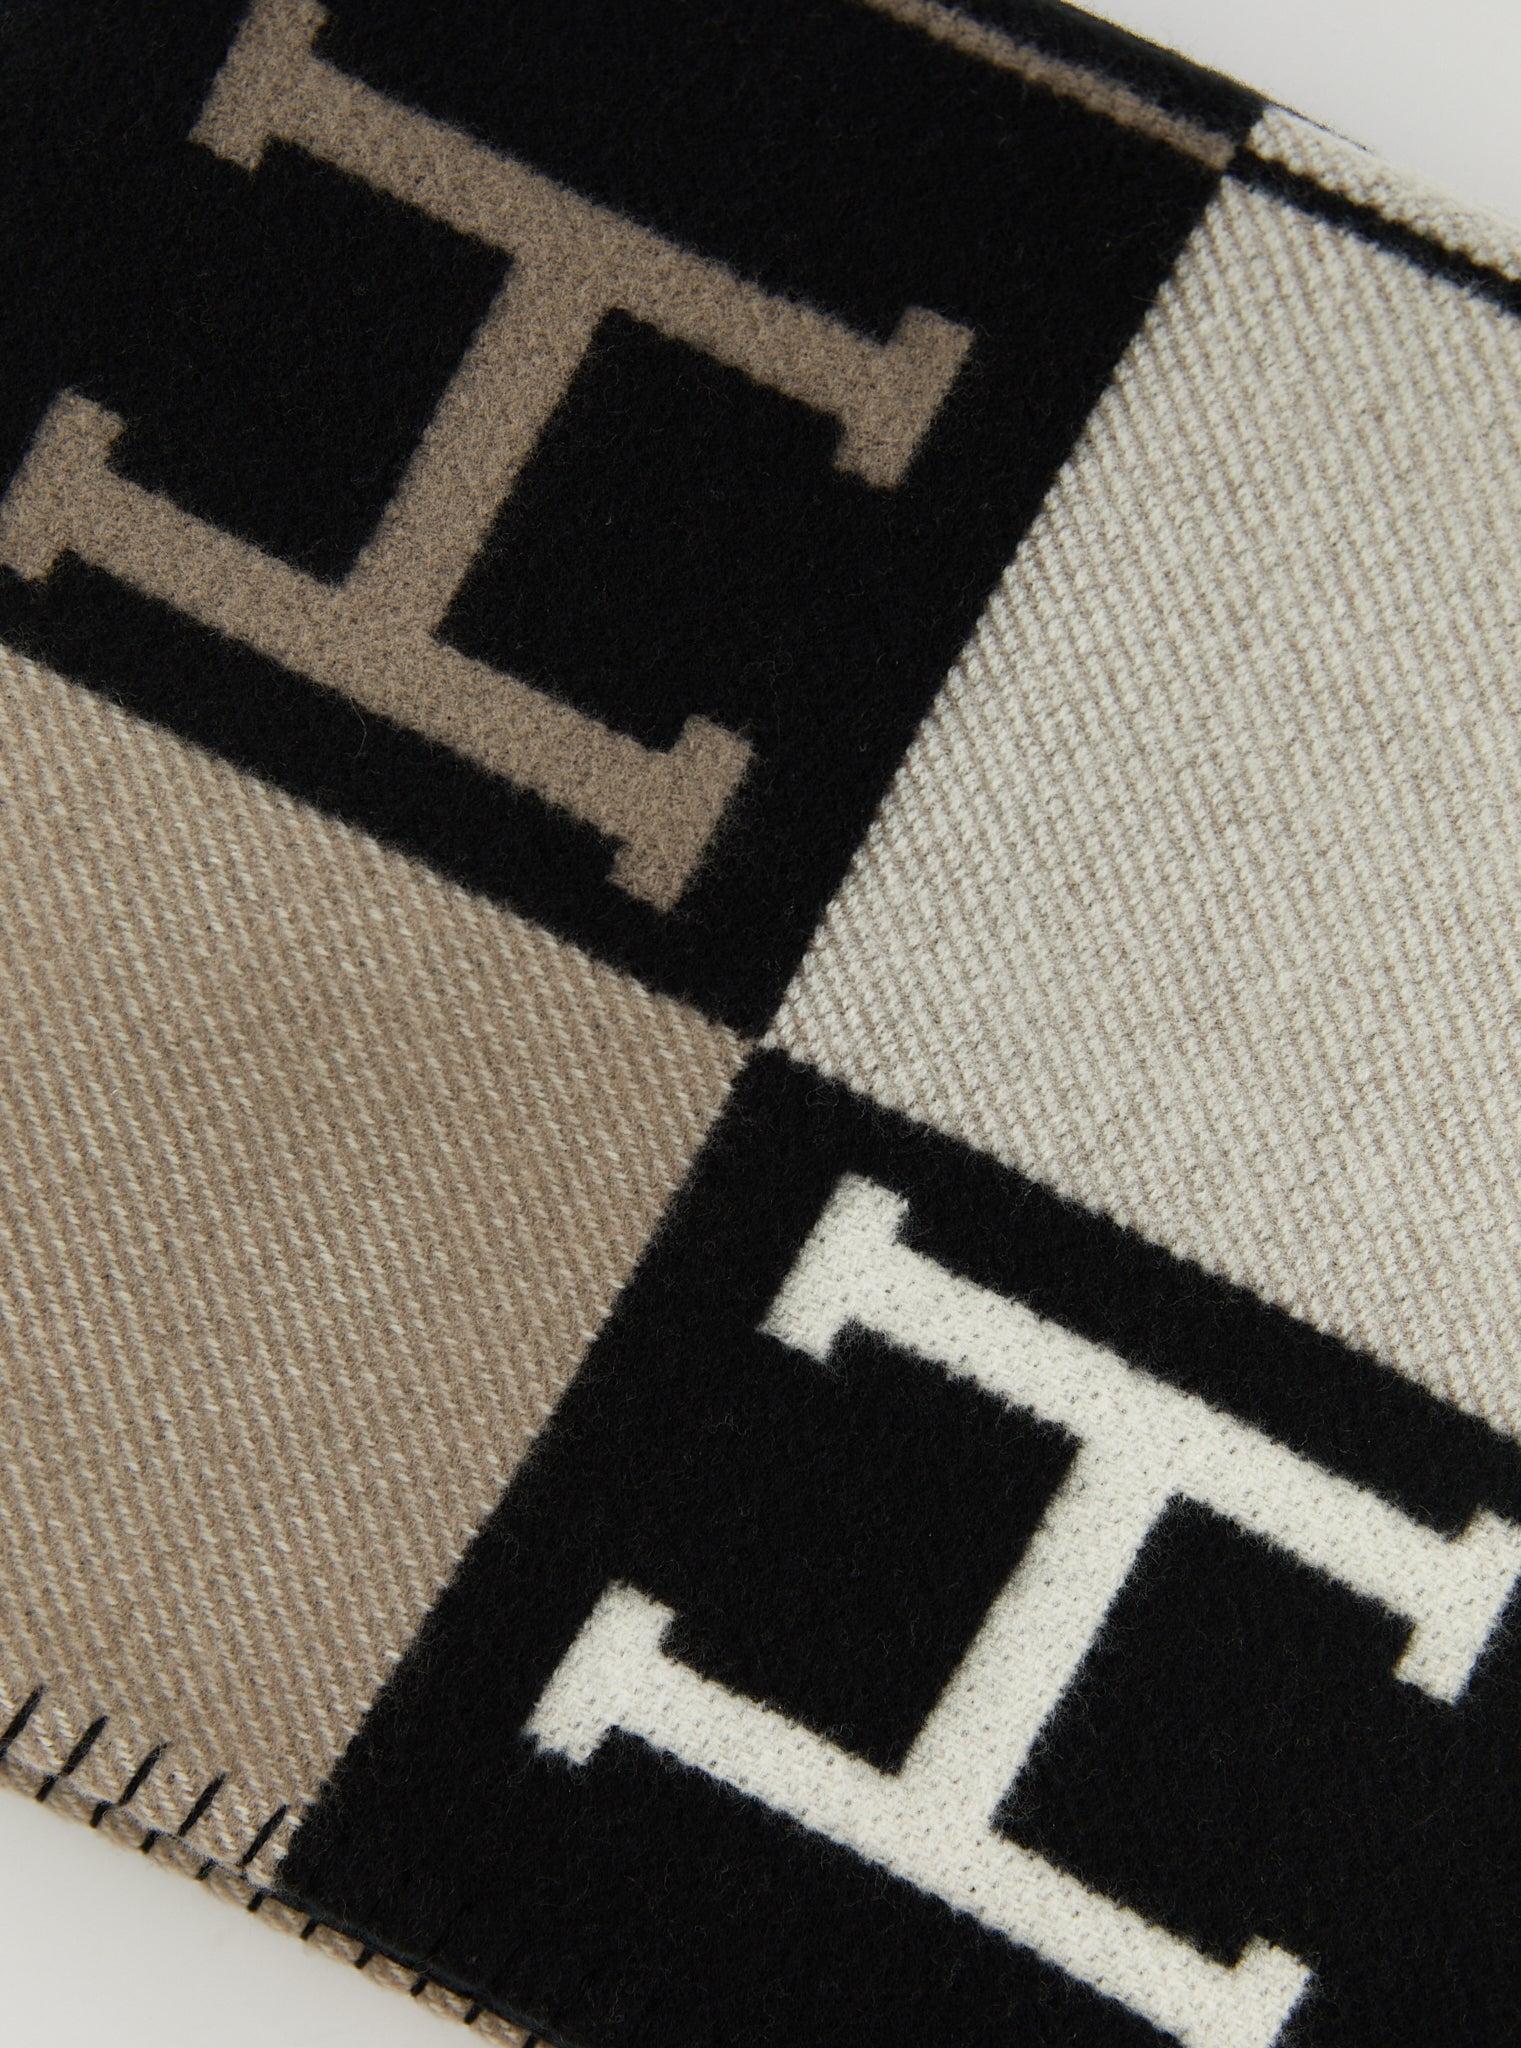 Hermès Avalon III Throw Blanket in Ecru and Black

Throw blanket in Merinos wool and cashmere (90% Merino wool, 10% Cashmere)

Made in Great Britain

Dimensions: L 135 x H 170 cm